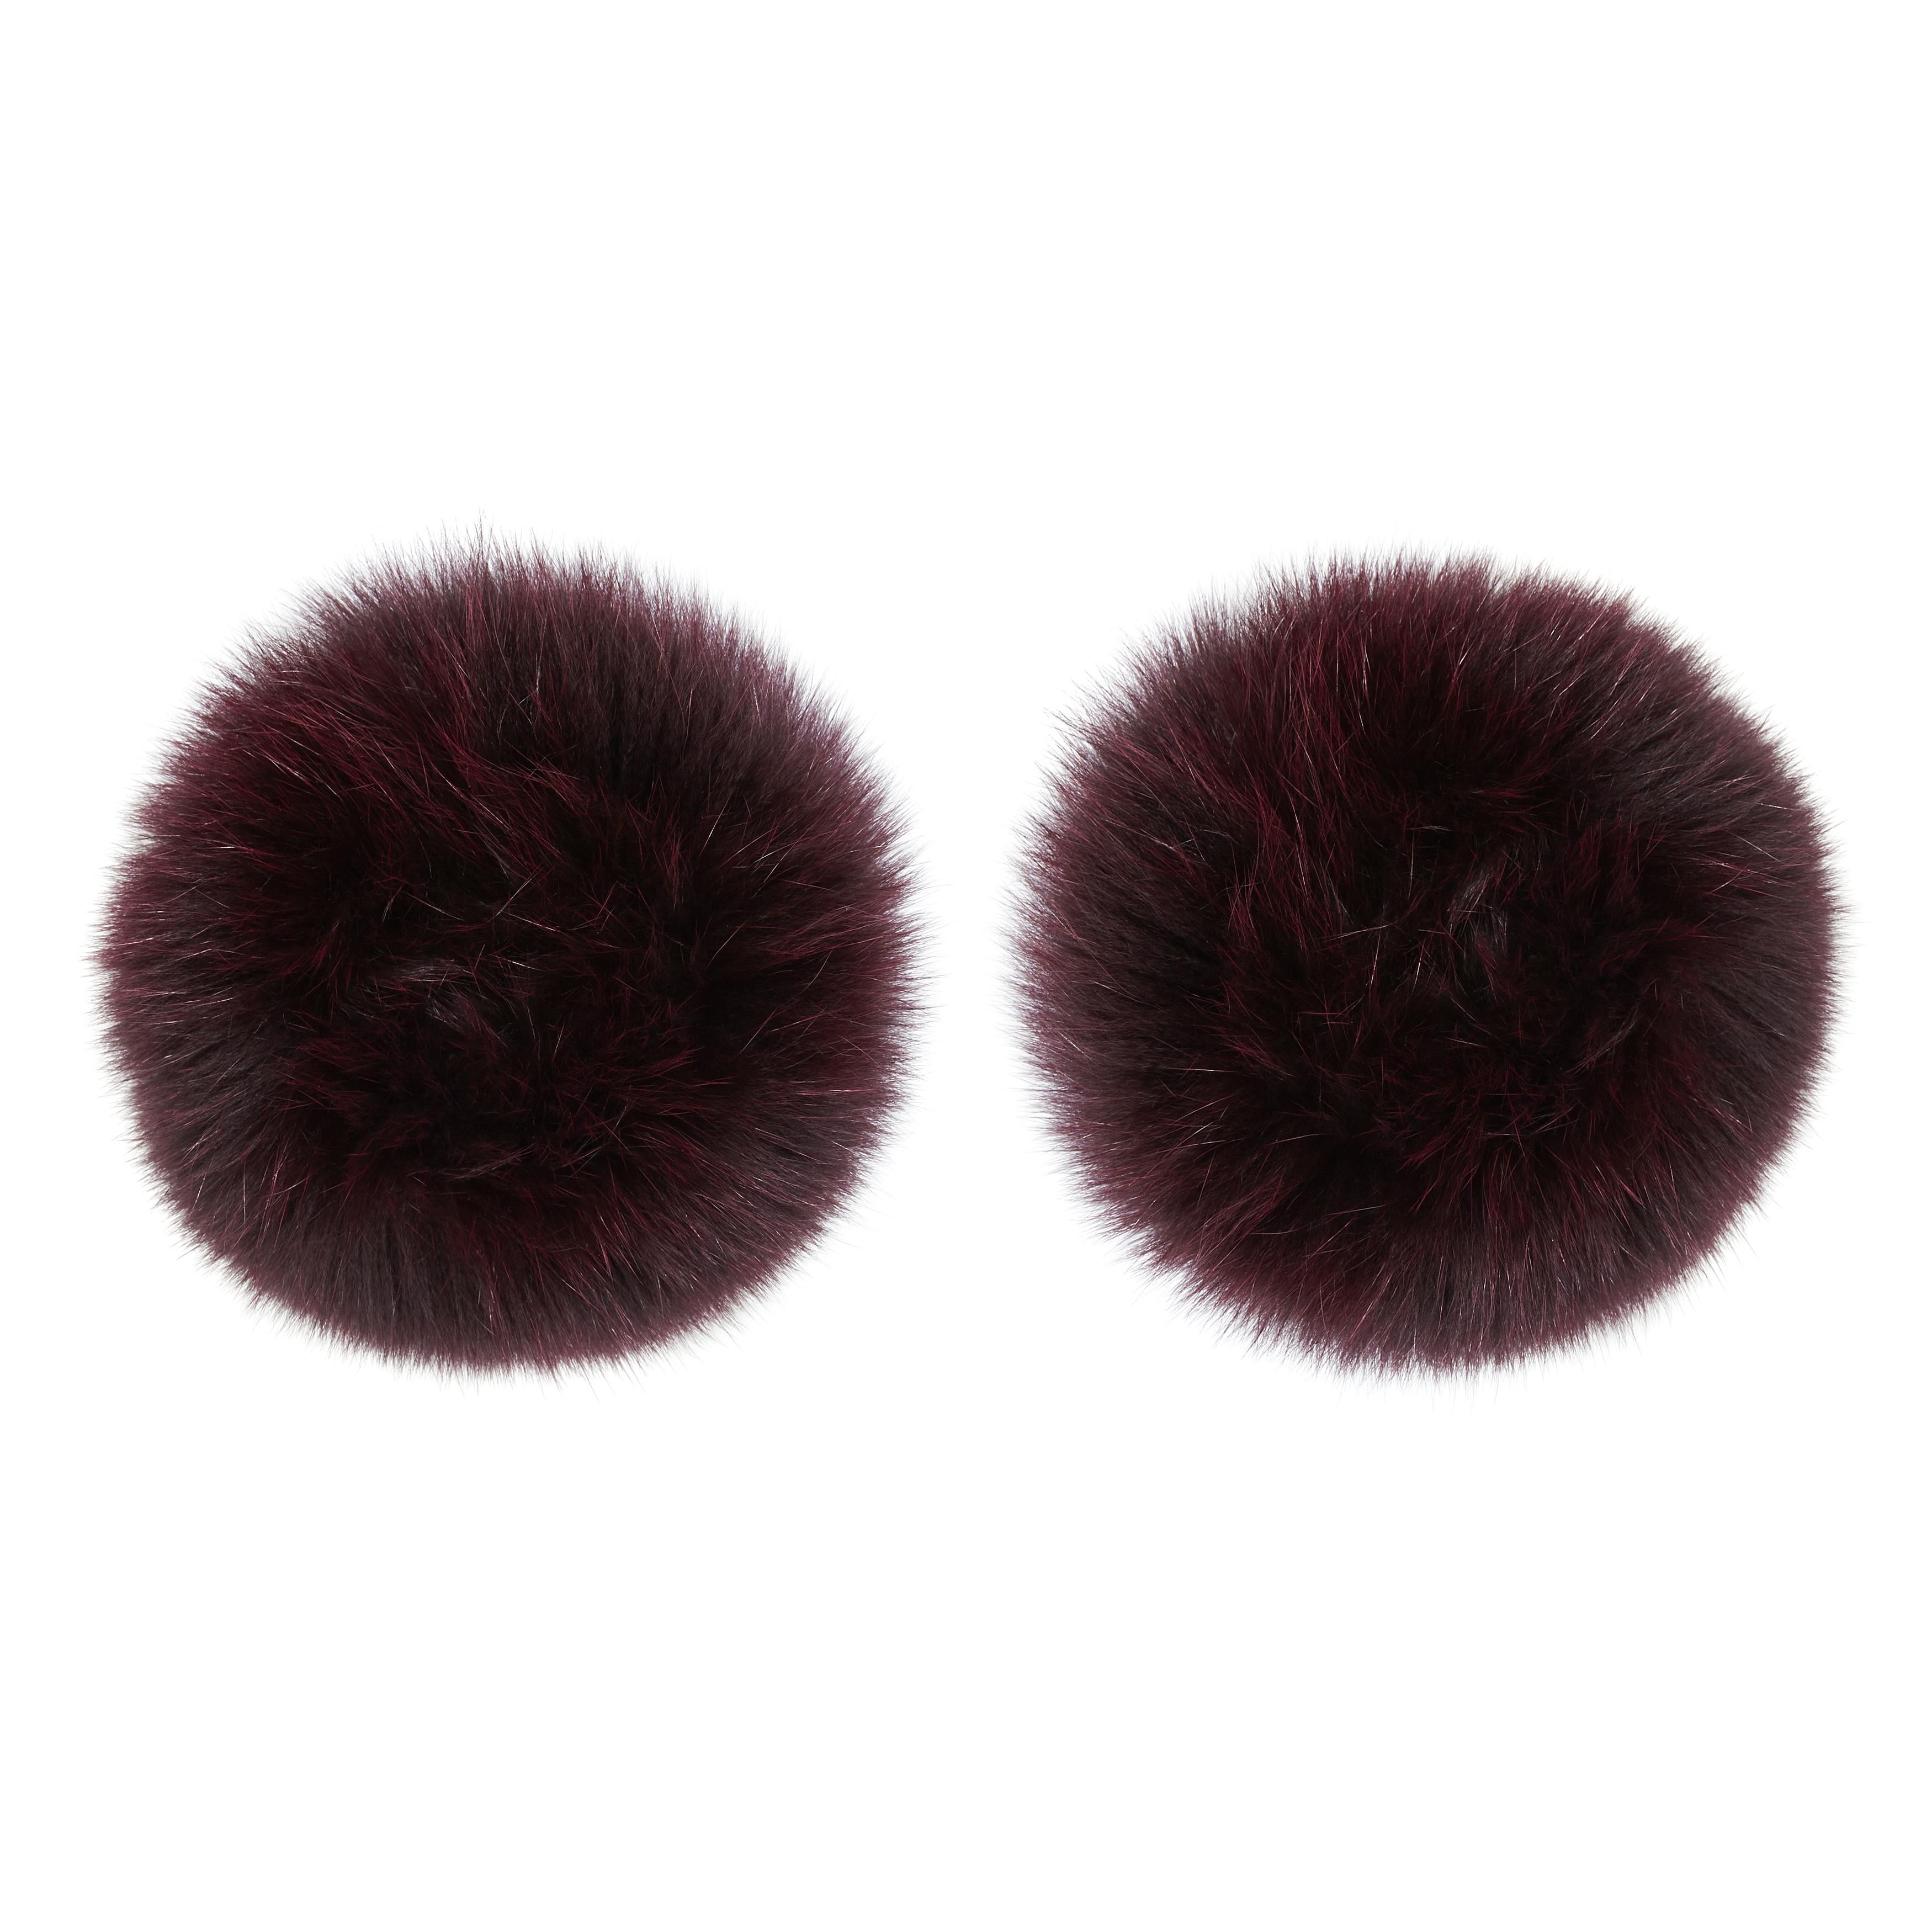 Verheyen London Snap on Fox Cuffs are the perfect accessory for winter/autumn dressing. Wear over any jumper or coat, these cuffs will jazz up any look and keep you staying cosy with style. 

Size - Double 


All fur is origin assured and ethically